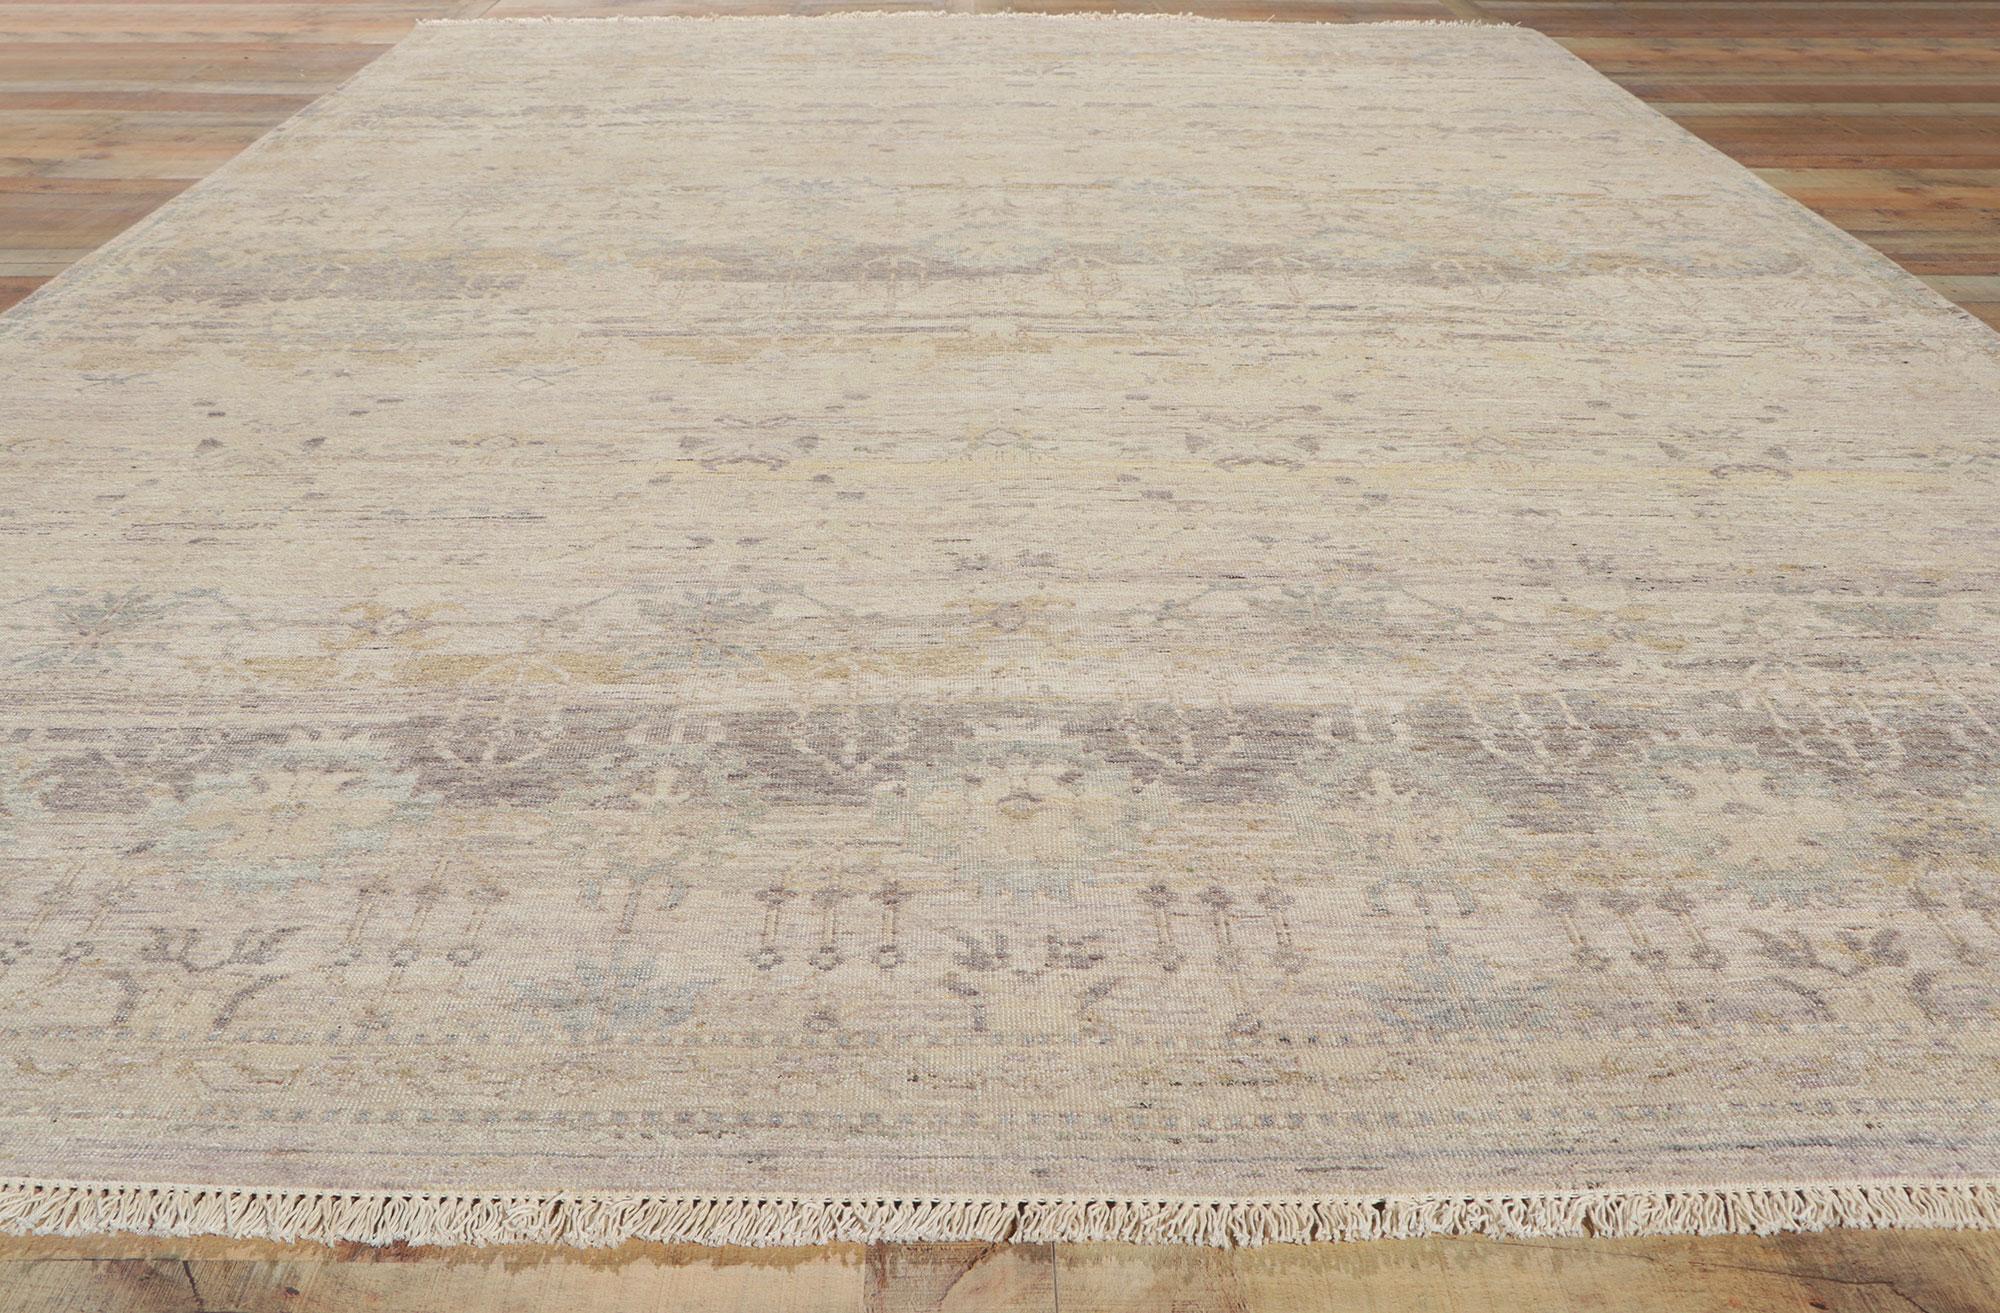 New Vintage-Style Distressed Rug with Neutral Earth-Tone Colors In New Condition For Sale In Dallas, TX